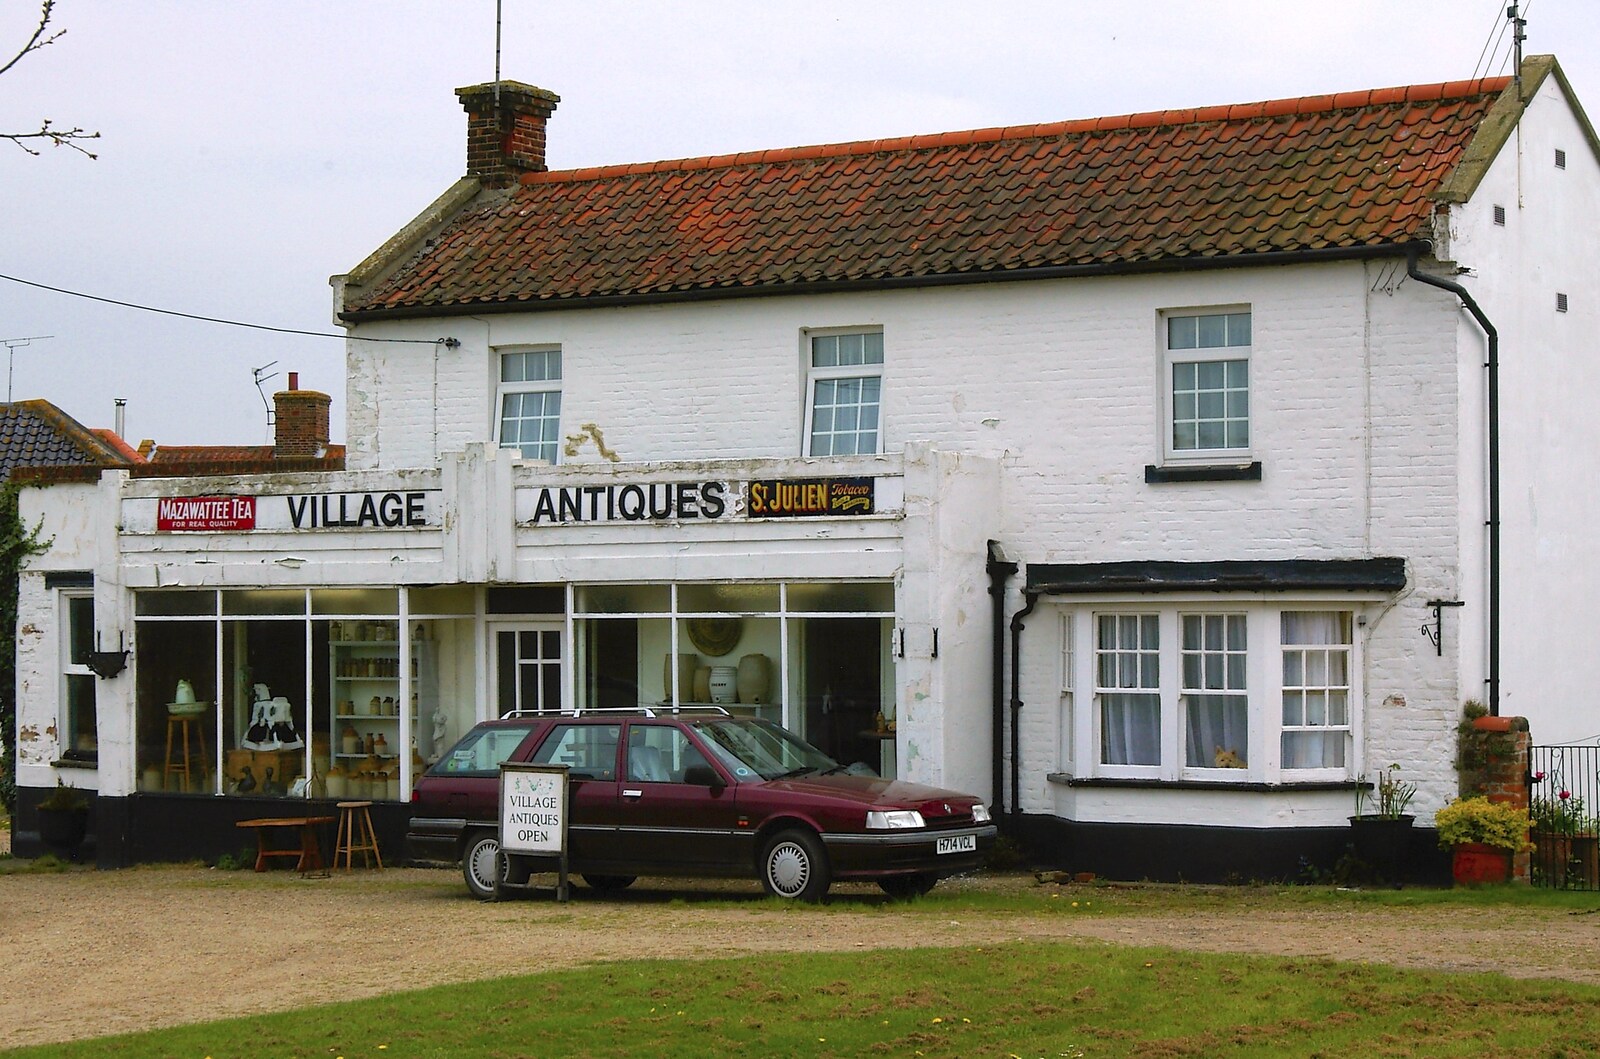 Village antique shop, with a 'Mazawatee Tea' sign from The BSCC does The Pheasant Hotel, Kelling, Norfolk - 6th May 2006